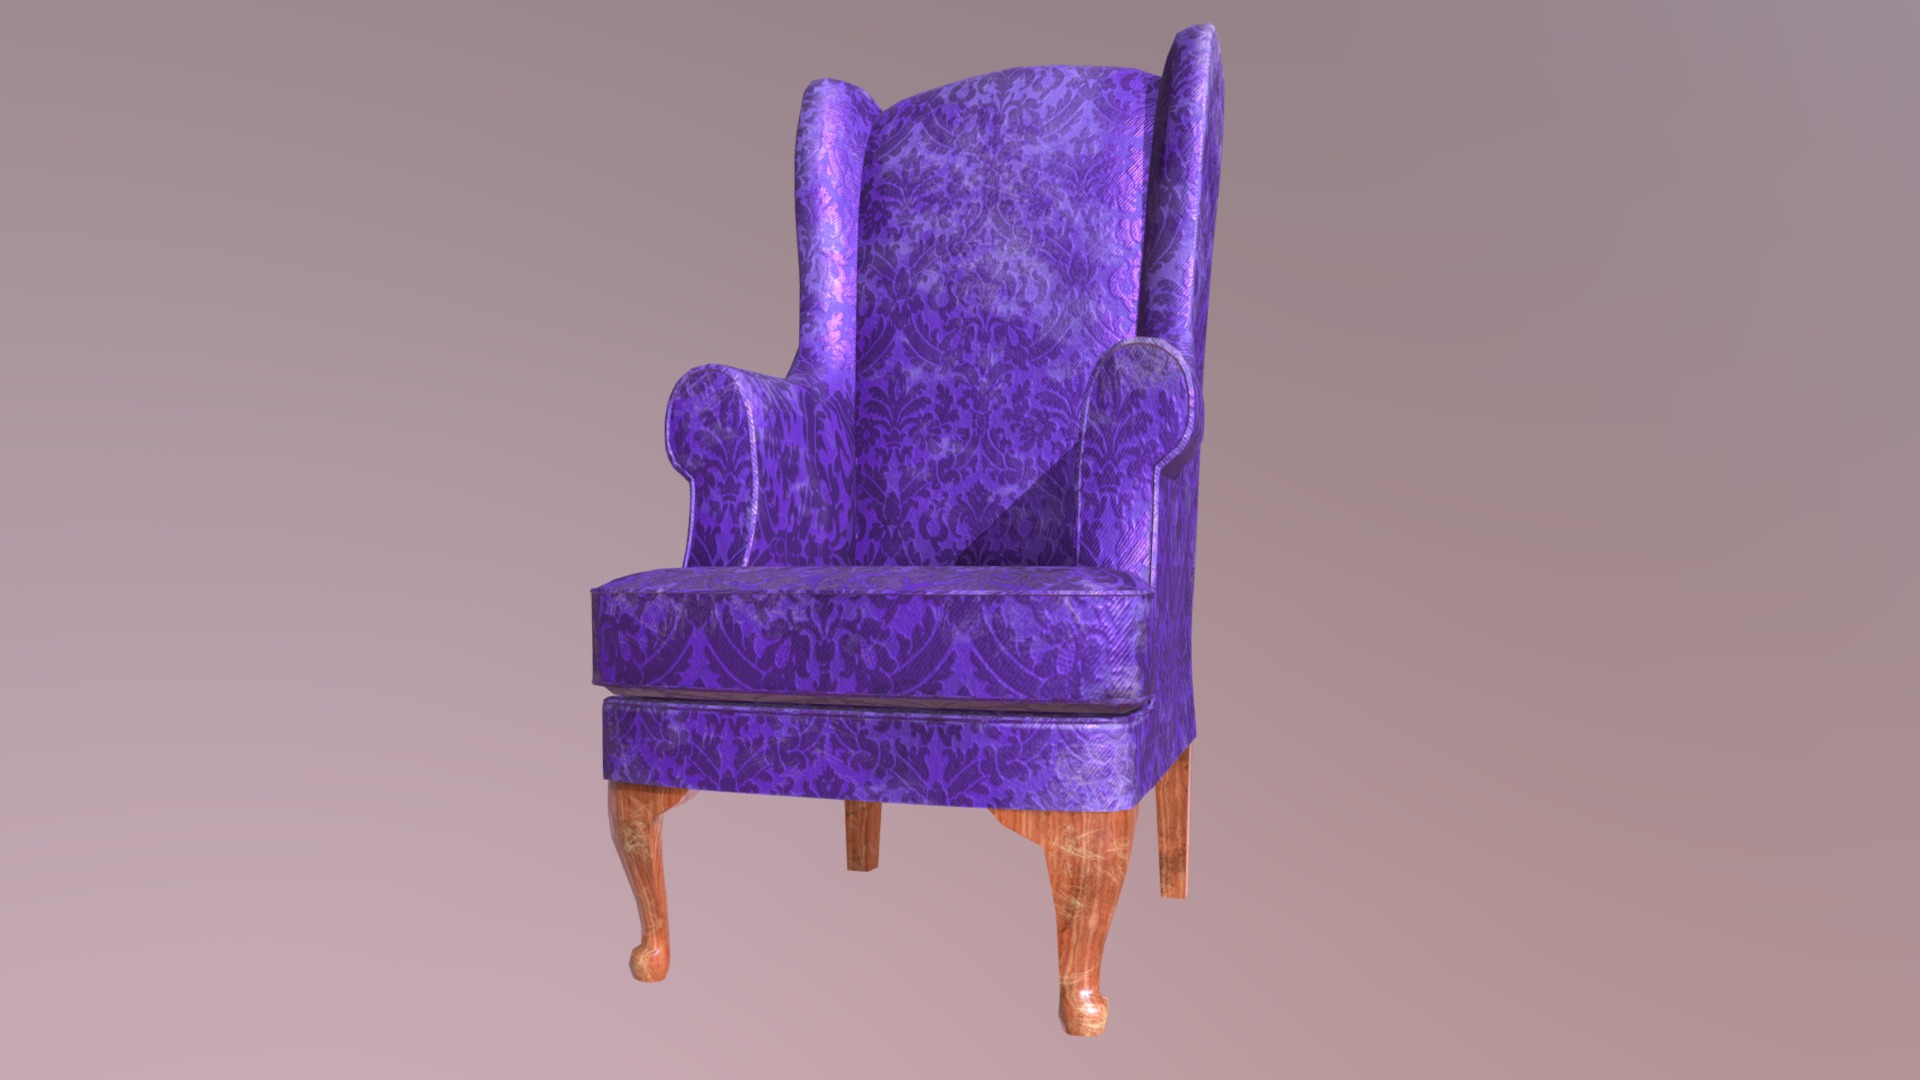 3D model Lounge Chair C - This is a 3D model of the Lounge Chair C. The 3D model is about a purple chair with a cushion.